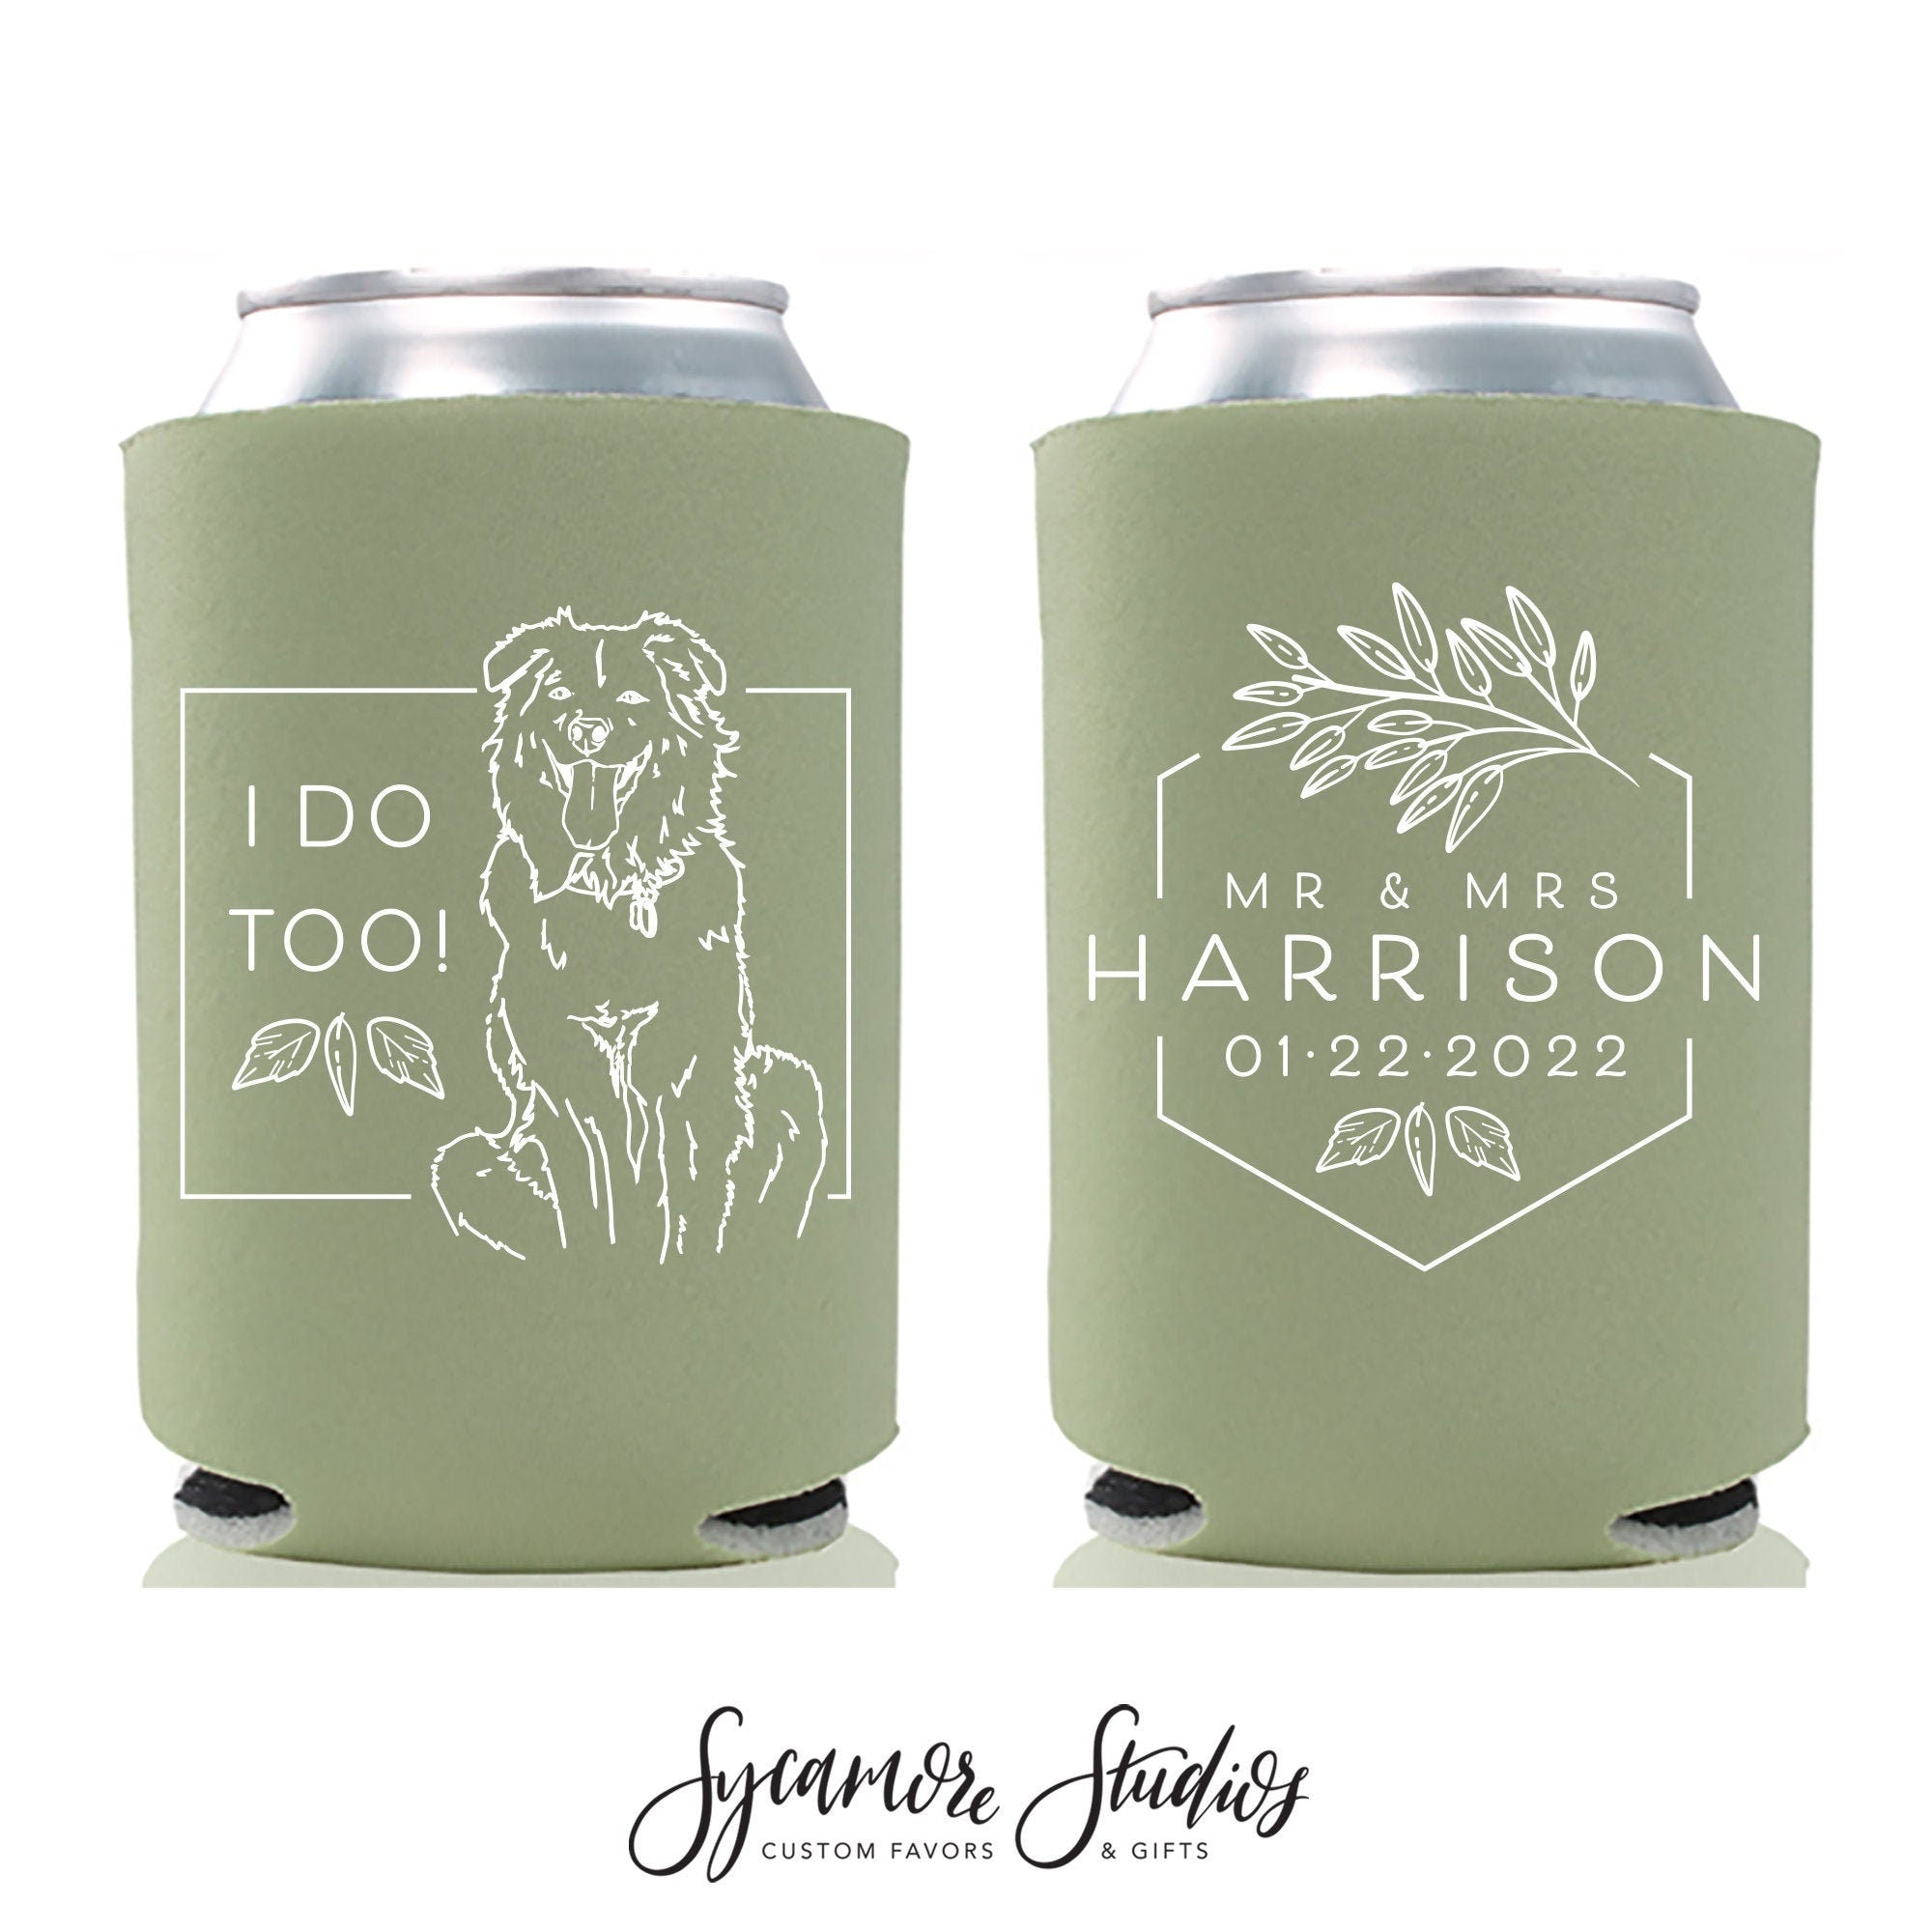 I'll Drink to That Wedding Can Cooler 151R Custom Wedding Favors